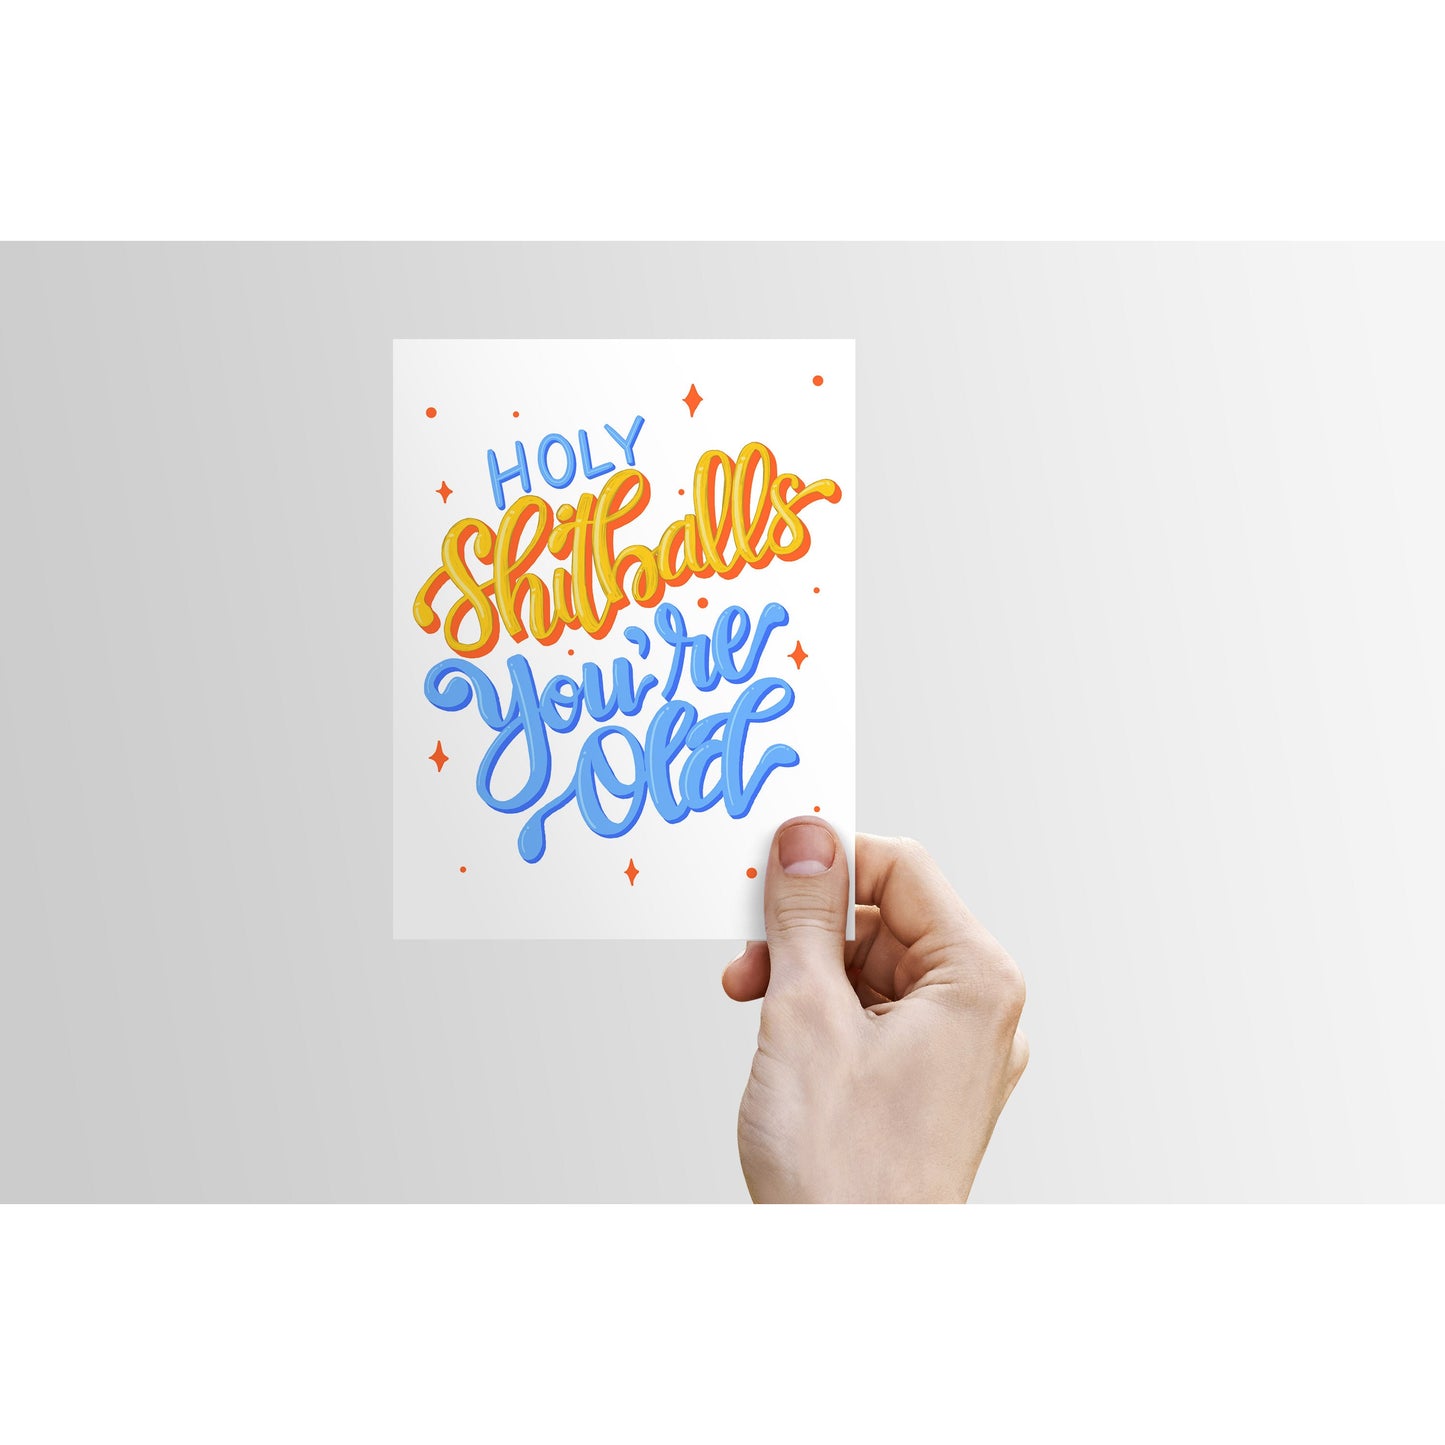 Holy Sh*tballs You're Old - Birthday Card | swear card, funny, old